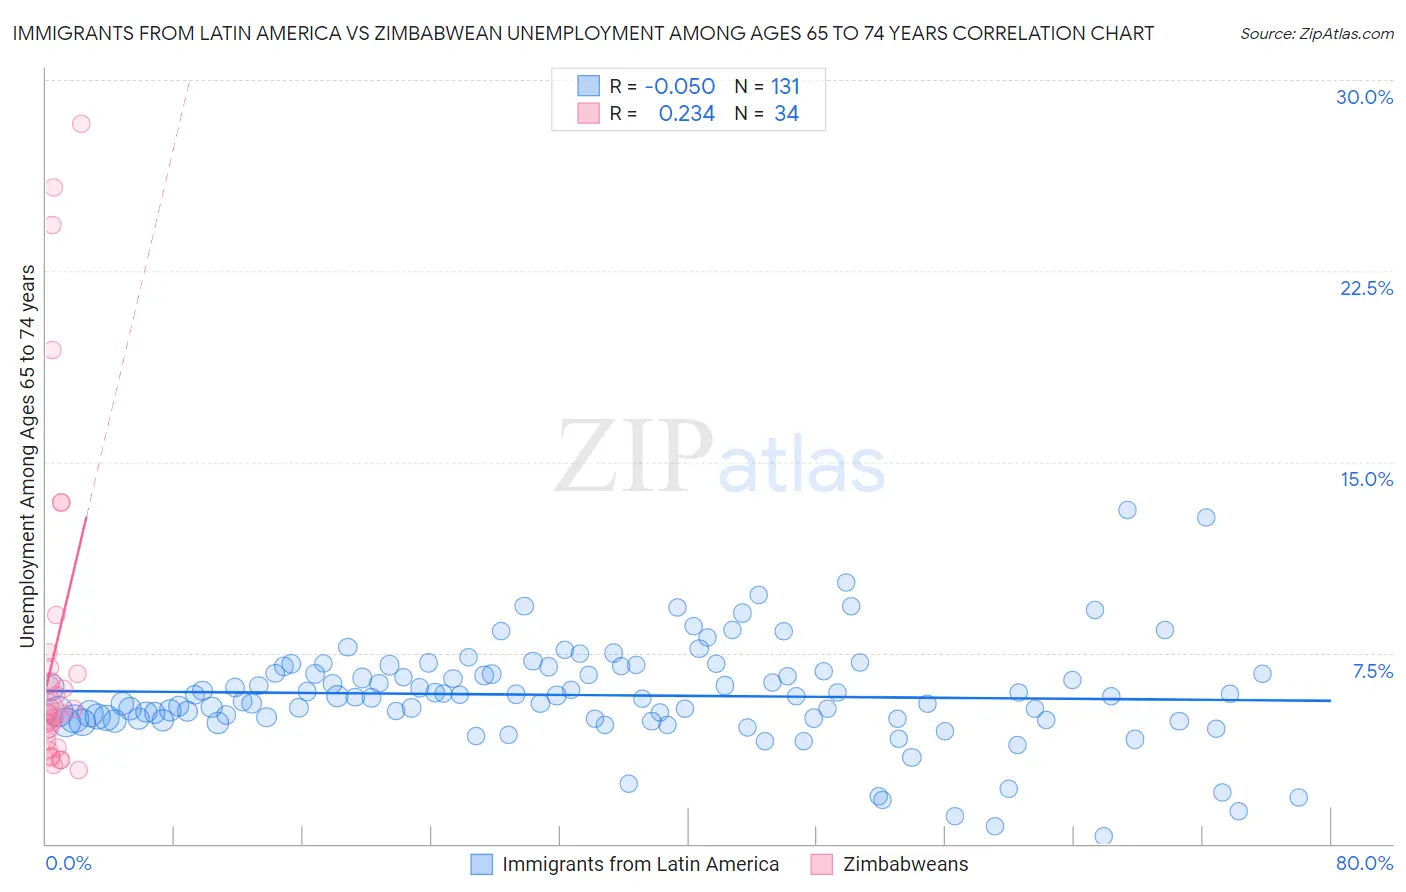 Immigrants from Latin America vs Zimbabwean Unemployment Among Ages 65 to 74 years